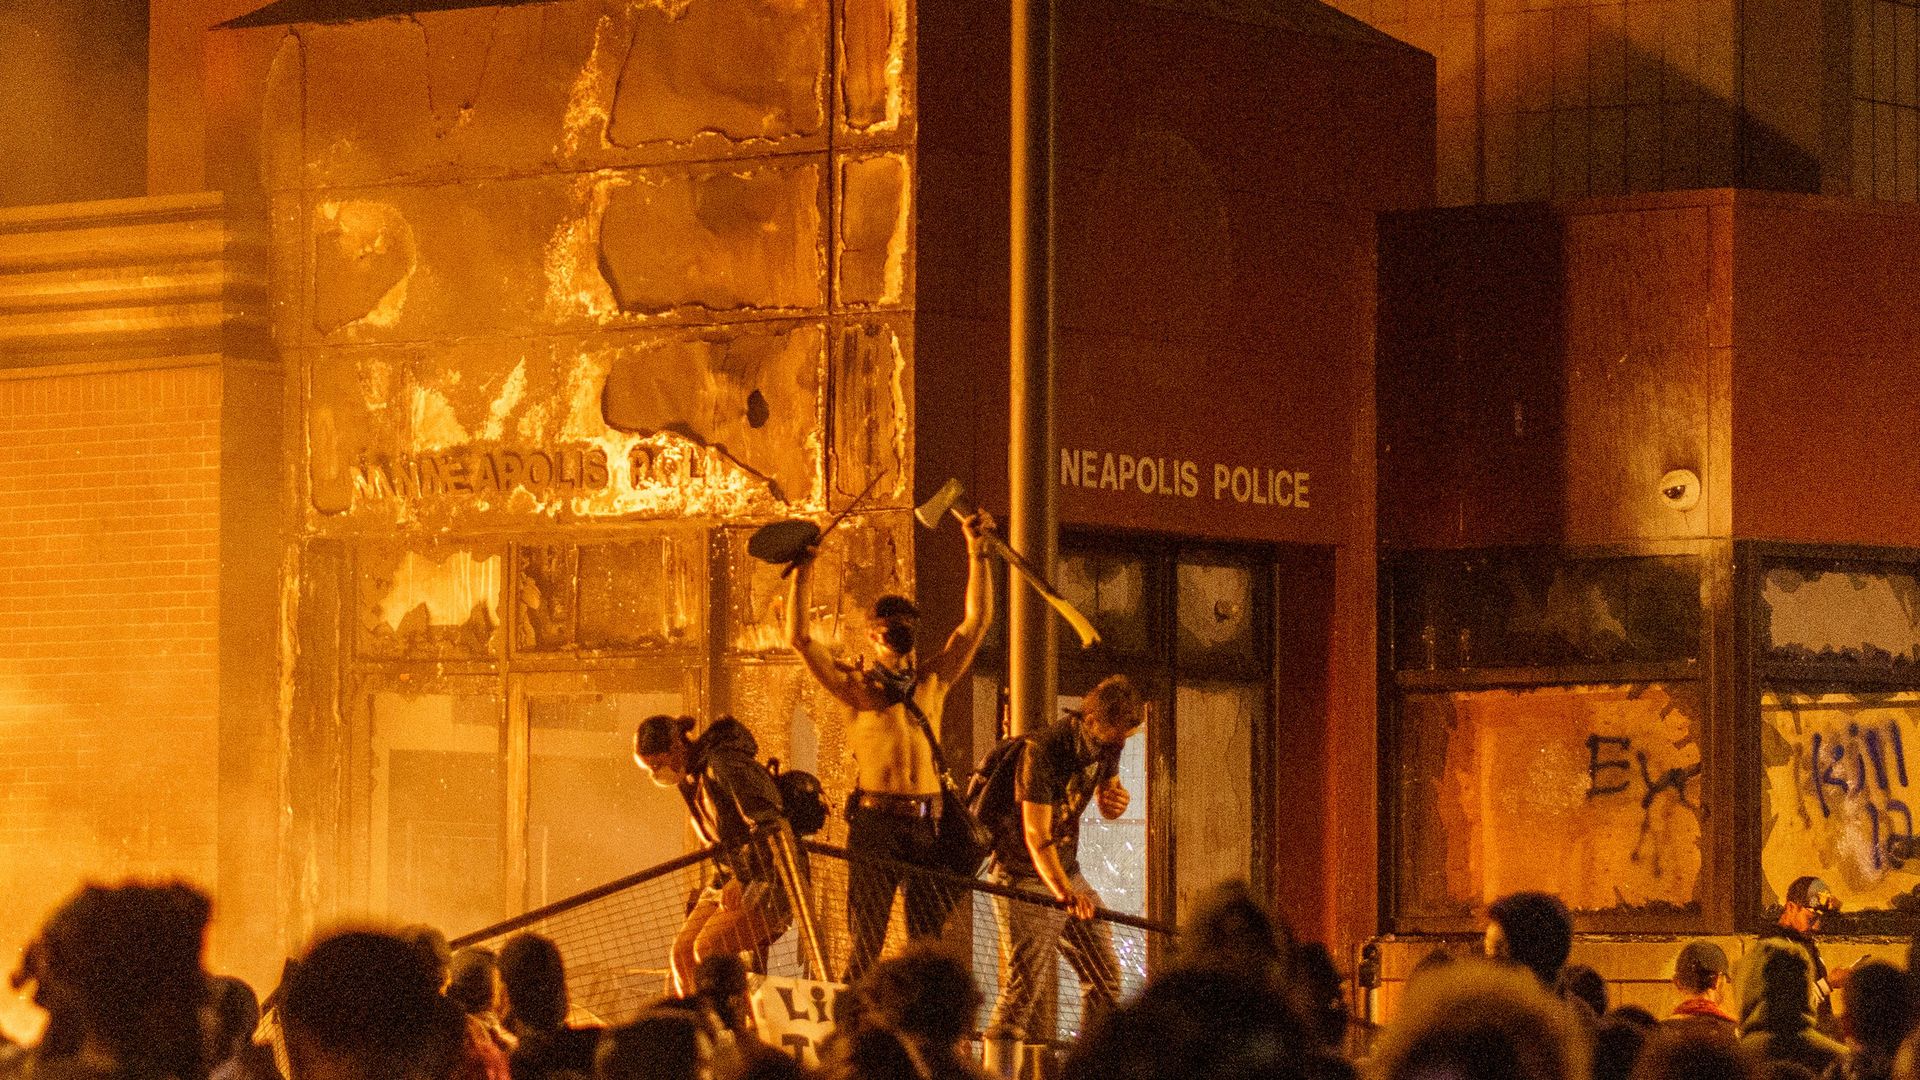 Flames from a nearby fire illuminate protesters standing on a barricade in front of the Third Police Precinct on May 28, 2020 in Minneapolis, Minnesota